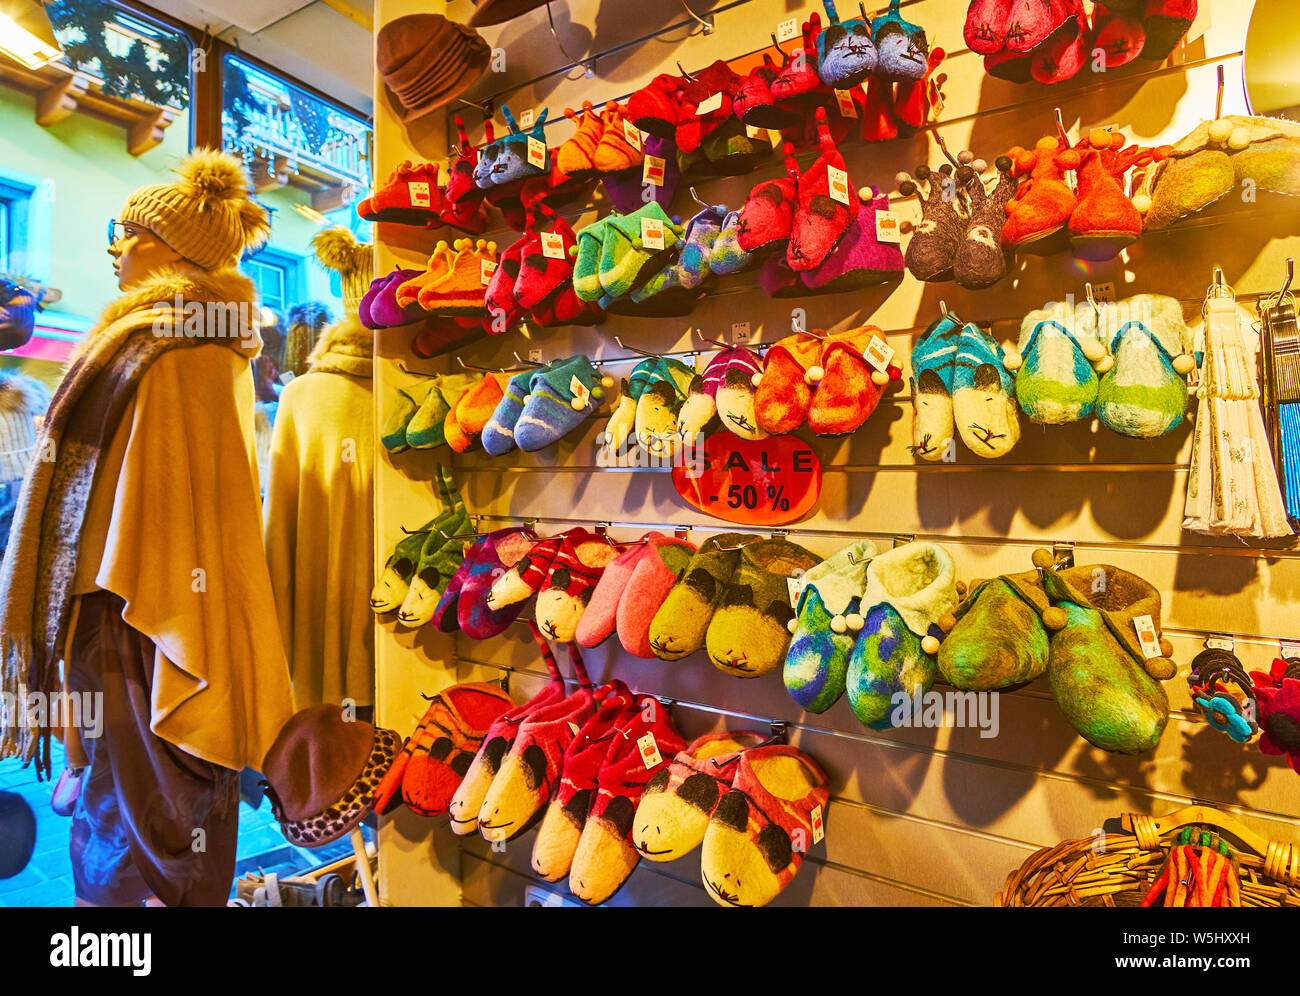 ZELL AM SEE, AUSTRIA - FEBRUARY 28, 2019: The garment store offers wide range of colorful handmade felted wool slippers in shape of mice and fairy tal Stock Photo